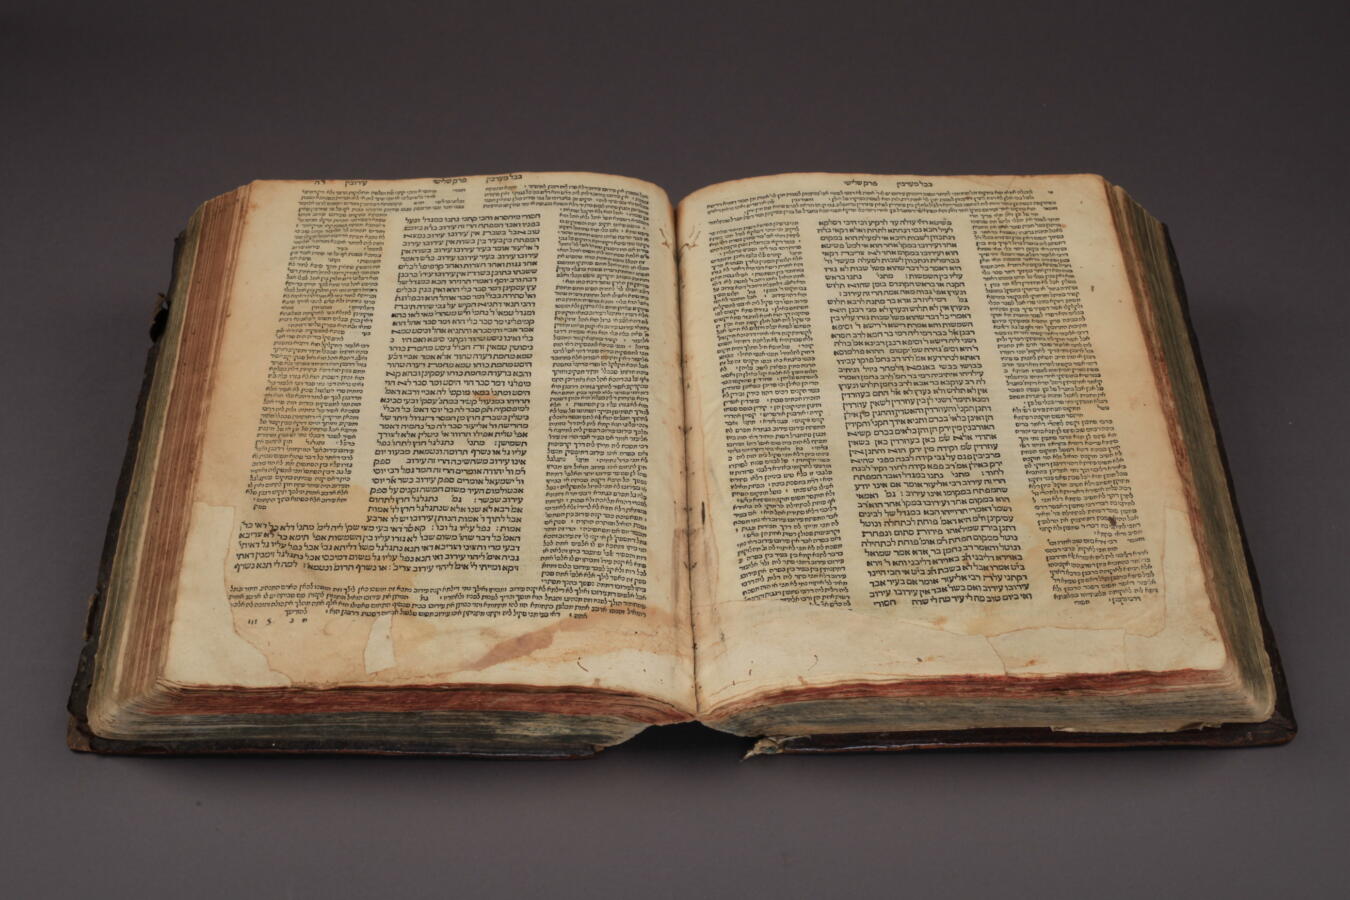 An old book with Hebrew lettering, open.